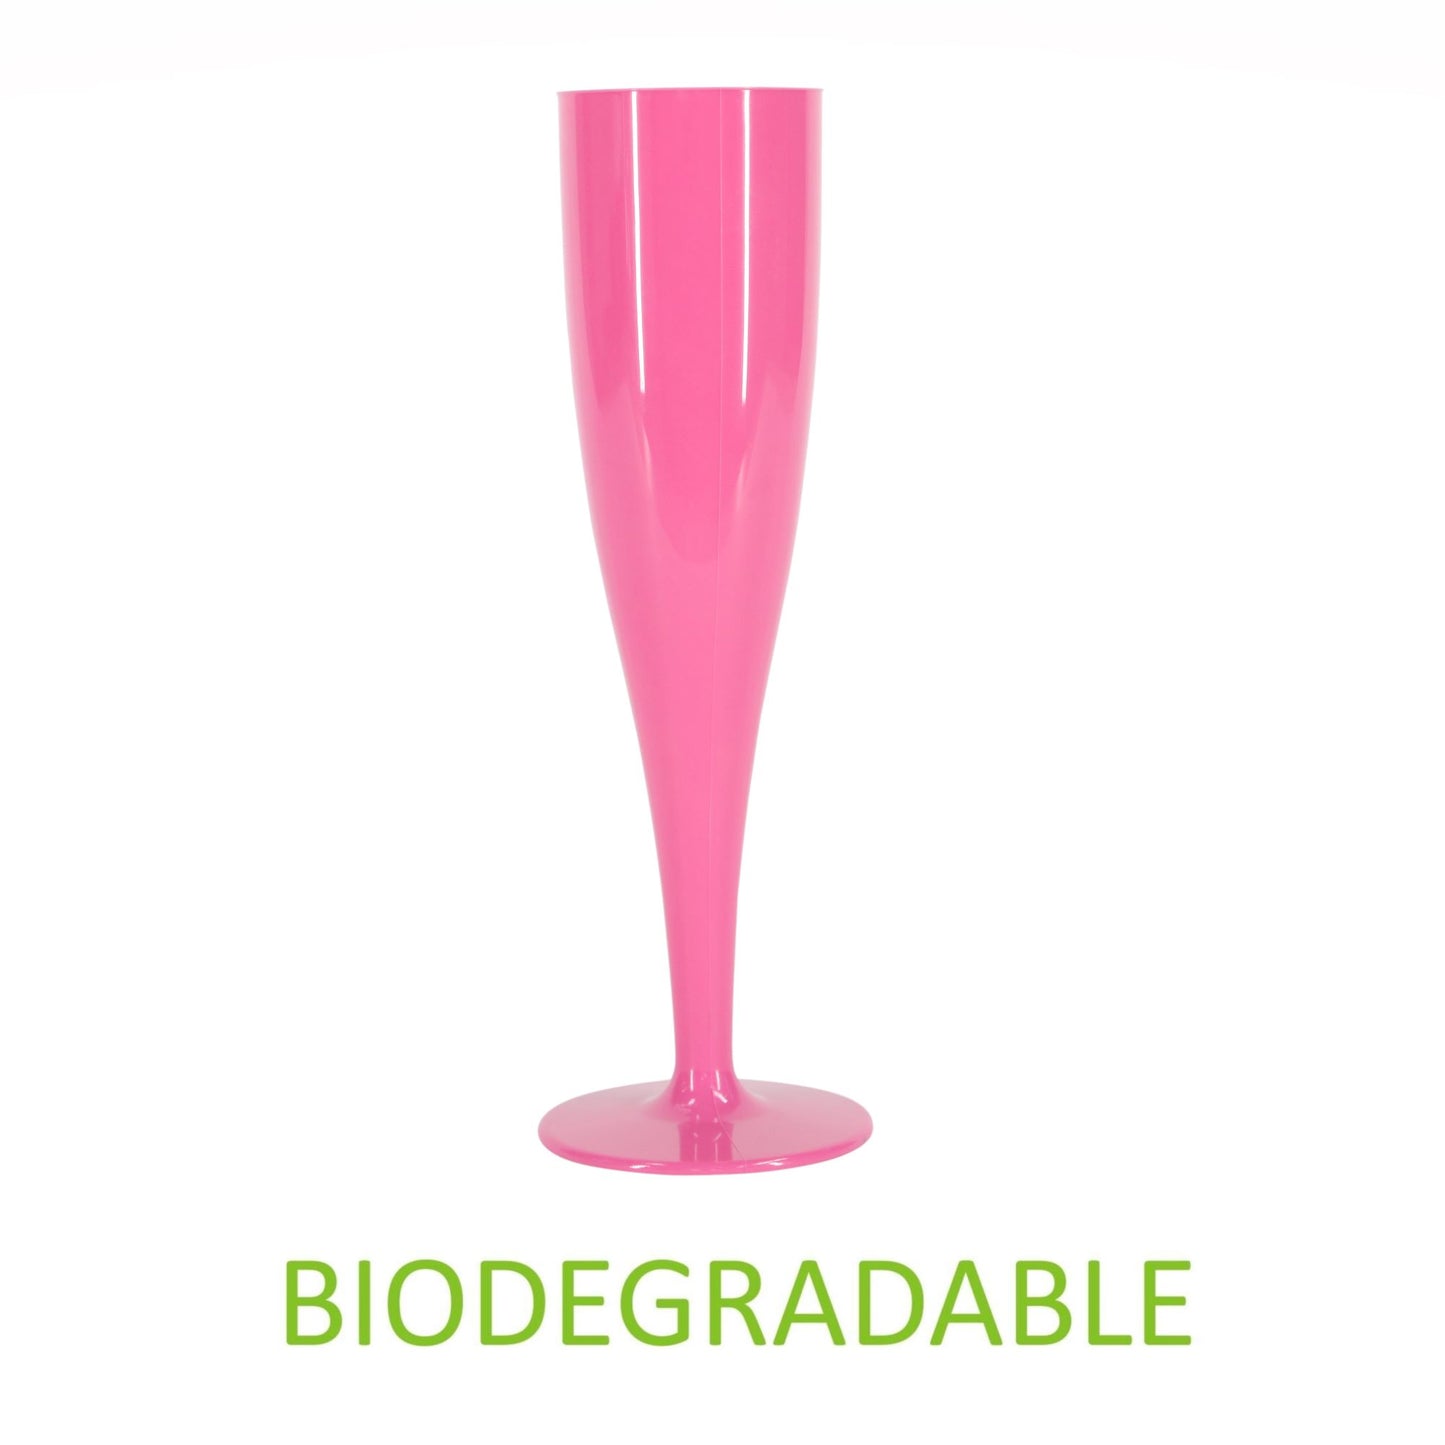 10 x Pink Prosecco Flutes – Made from Biodegradable Material in Glossy Fuchsia Colour 1-Piece Champagne Glass (Pack of 10 Glasses) Hen Do-5056020186748-PCUP-CHAMPBIOPINK-Product Pro-Black Flutes, Champagne Flute, Champagne Glasses, Flutes, Prosecco Flute, Prosecco Glasses